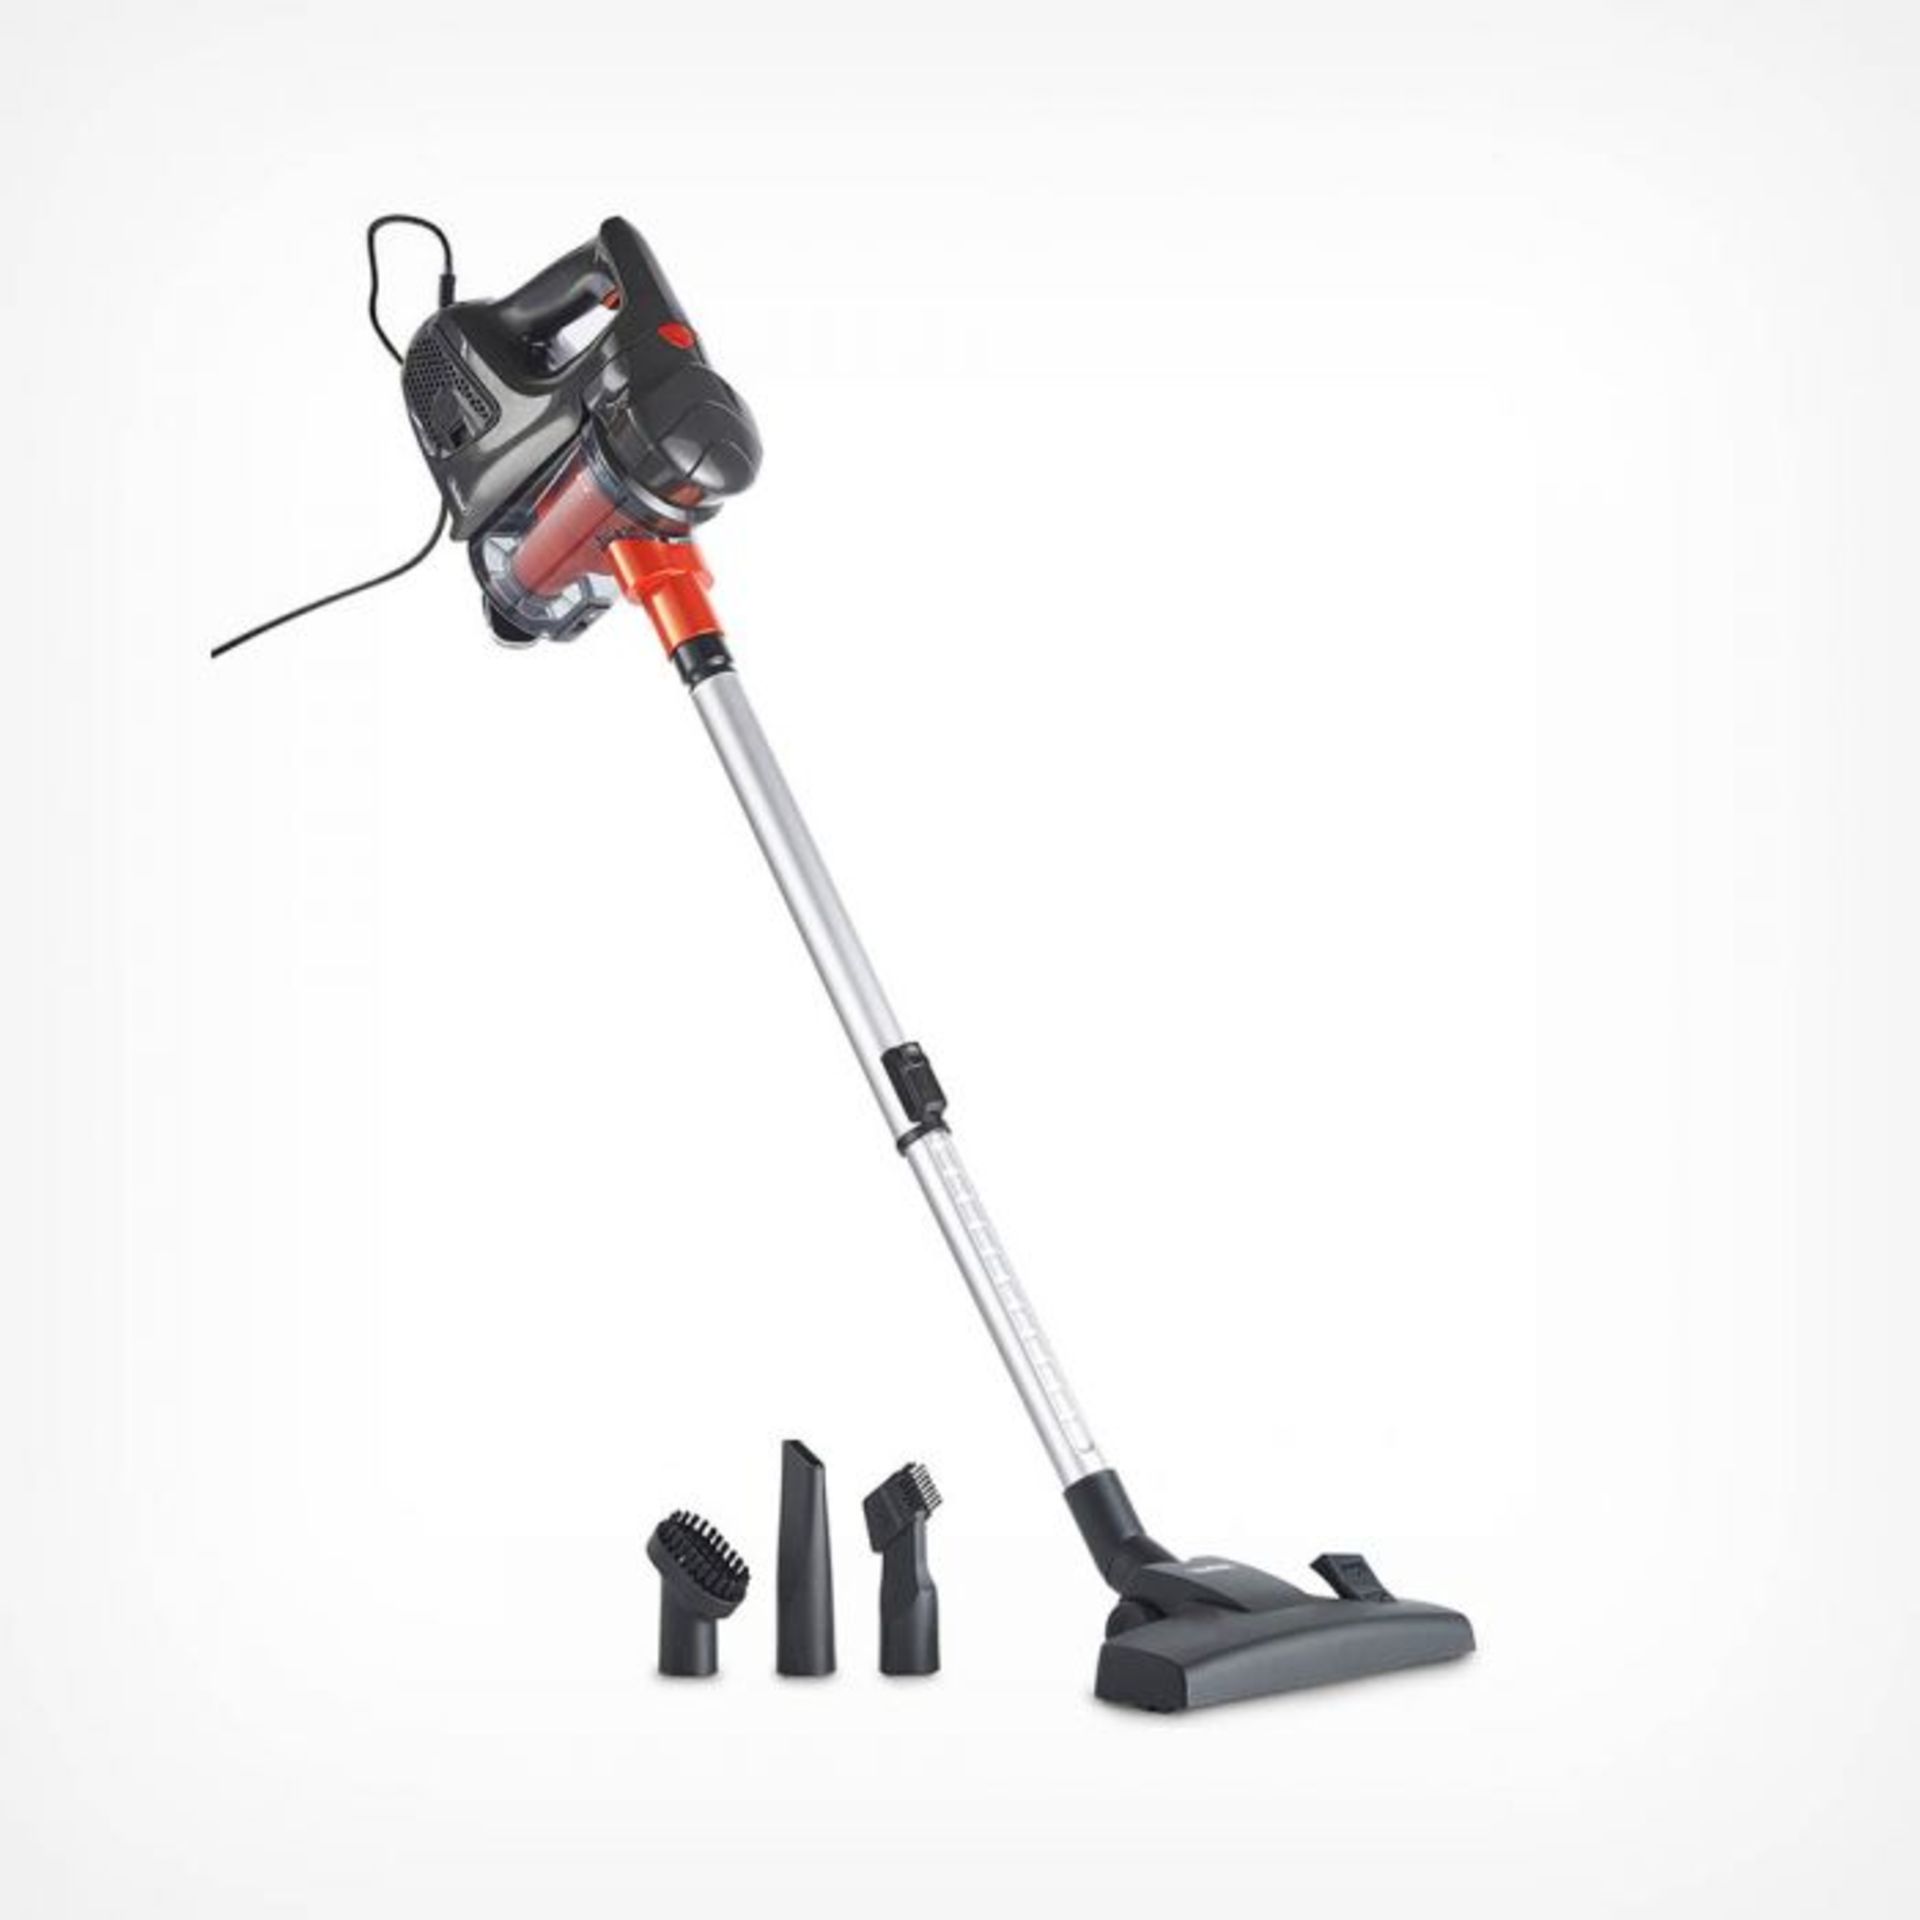 (V33) Corded Stick Vacuum Cleaner 600W Floor to ceiling cleaning power – effortlessly switch... - Image 3 of 6